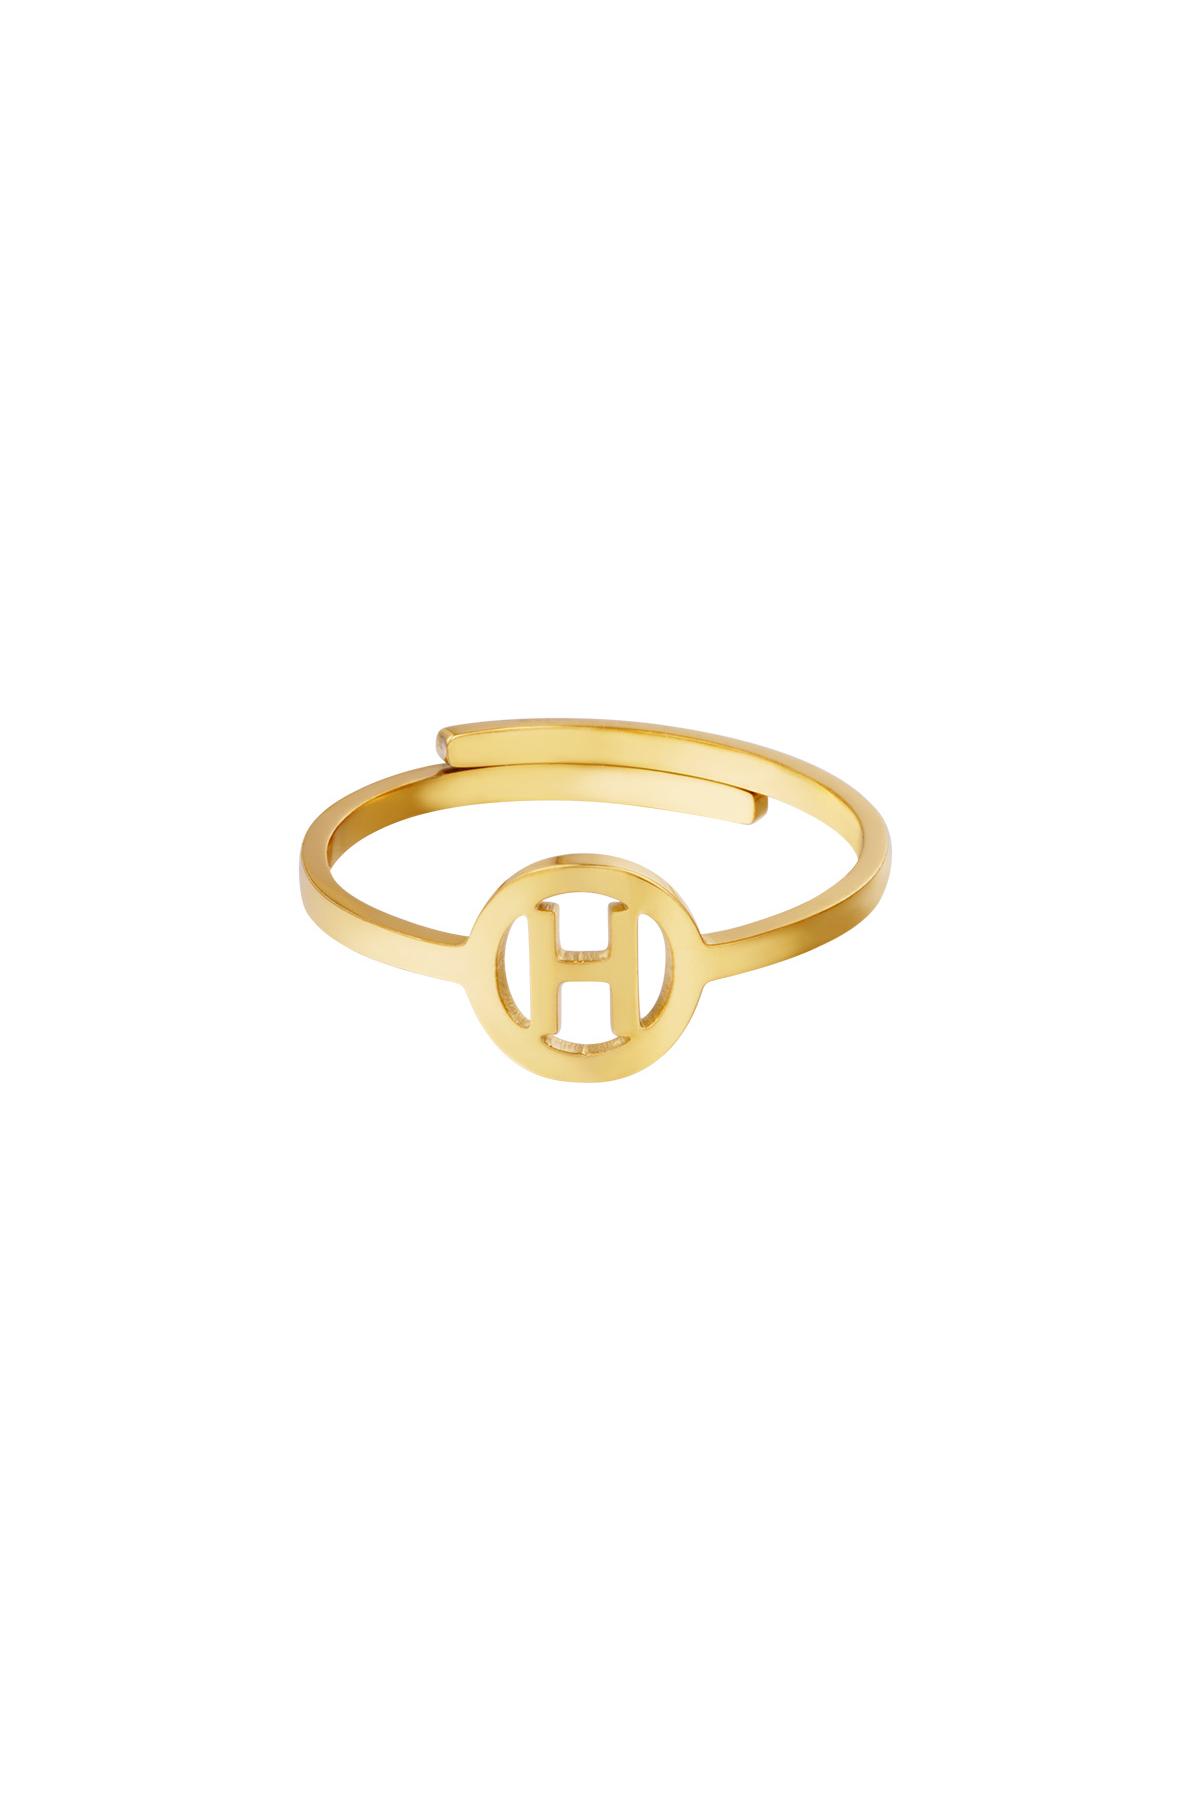 Stainless steel ring initial H Gold